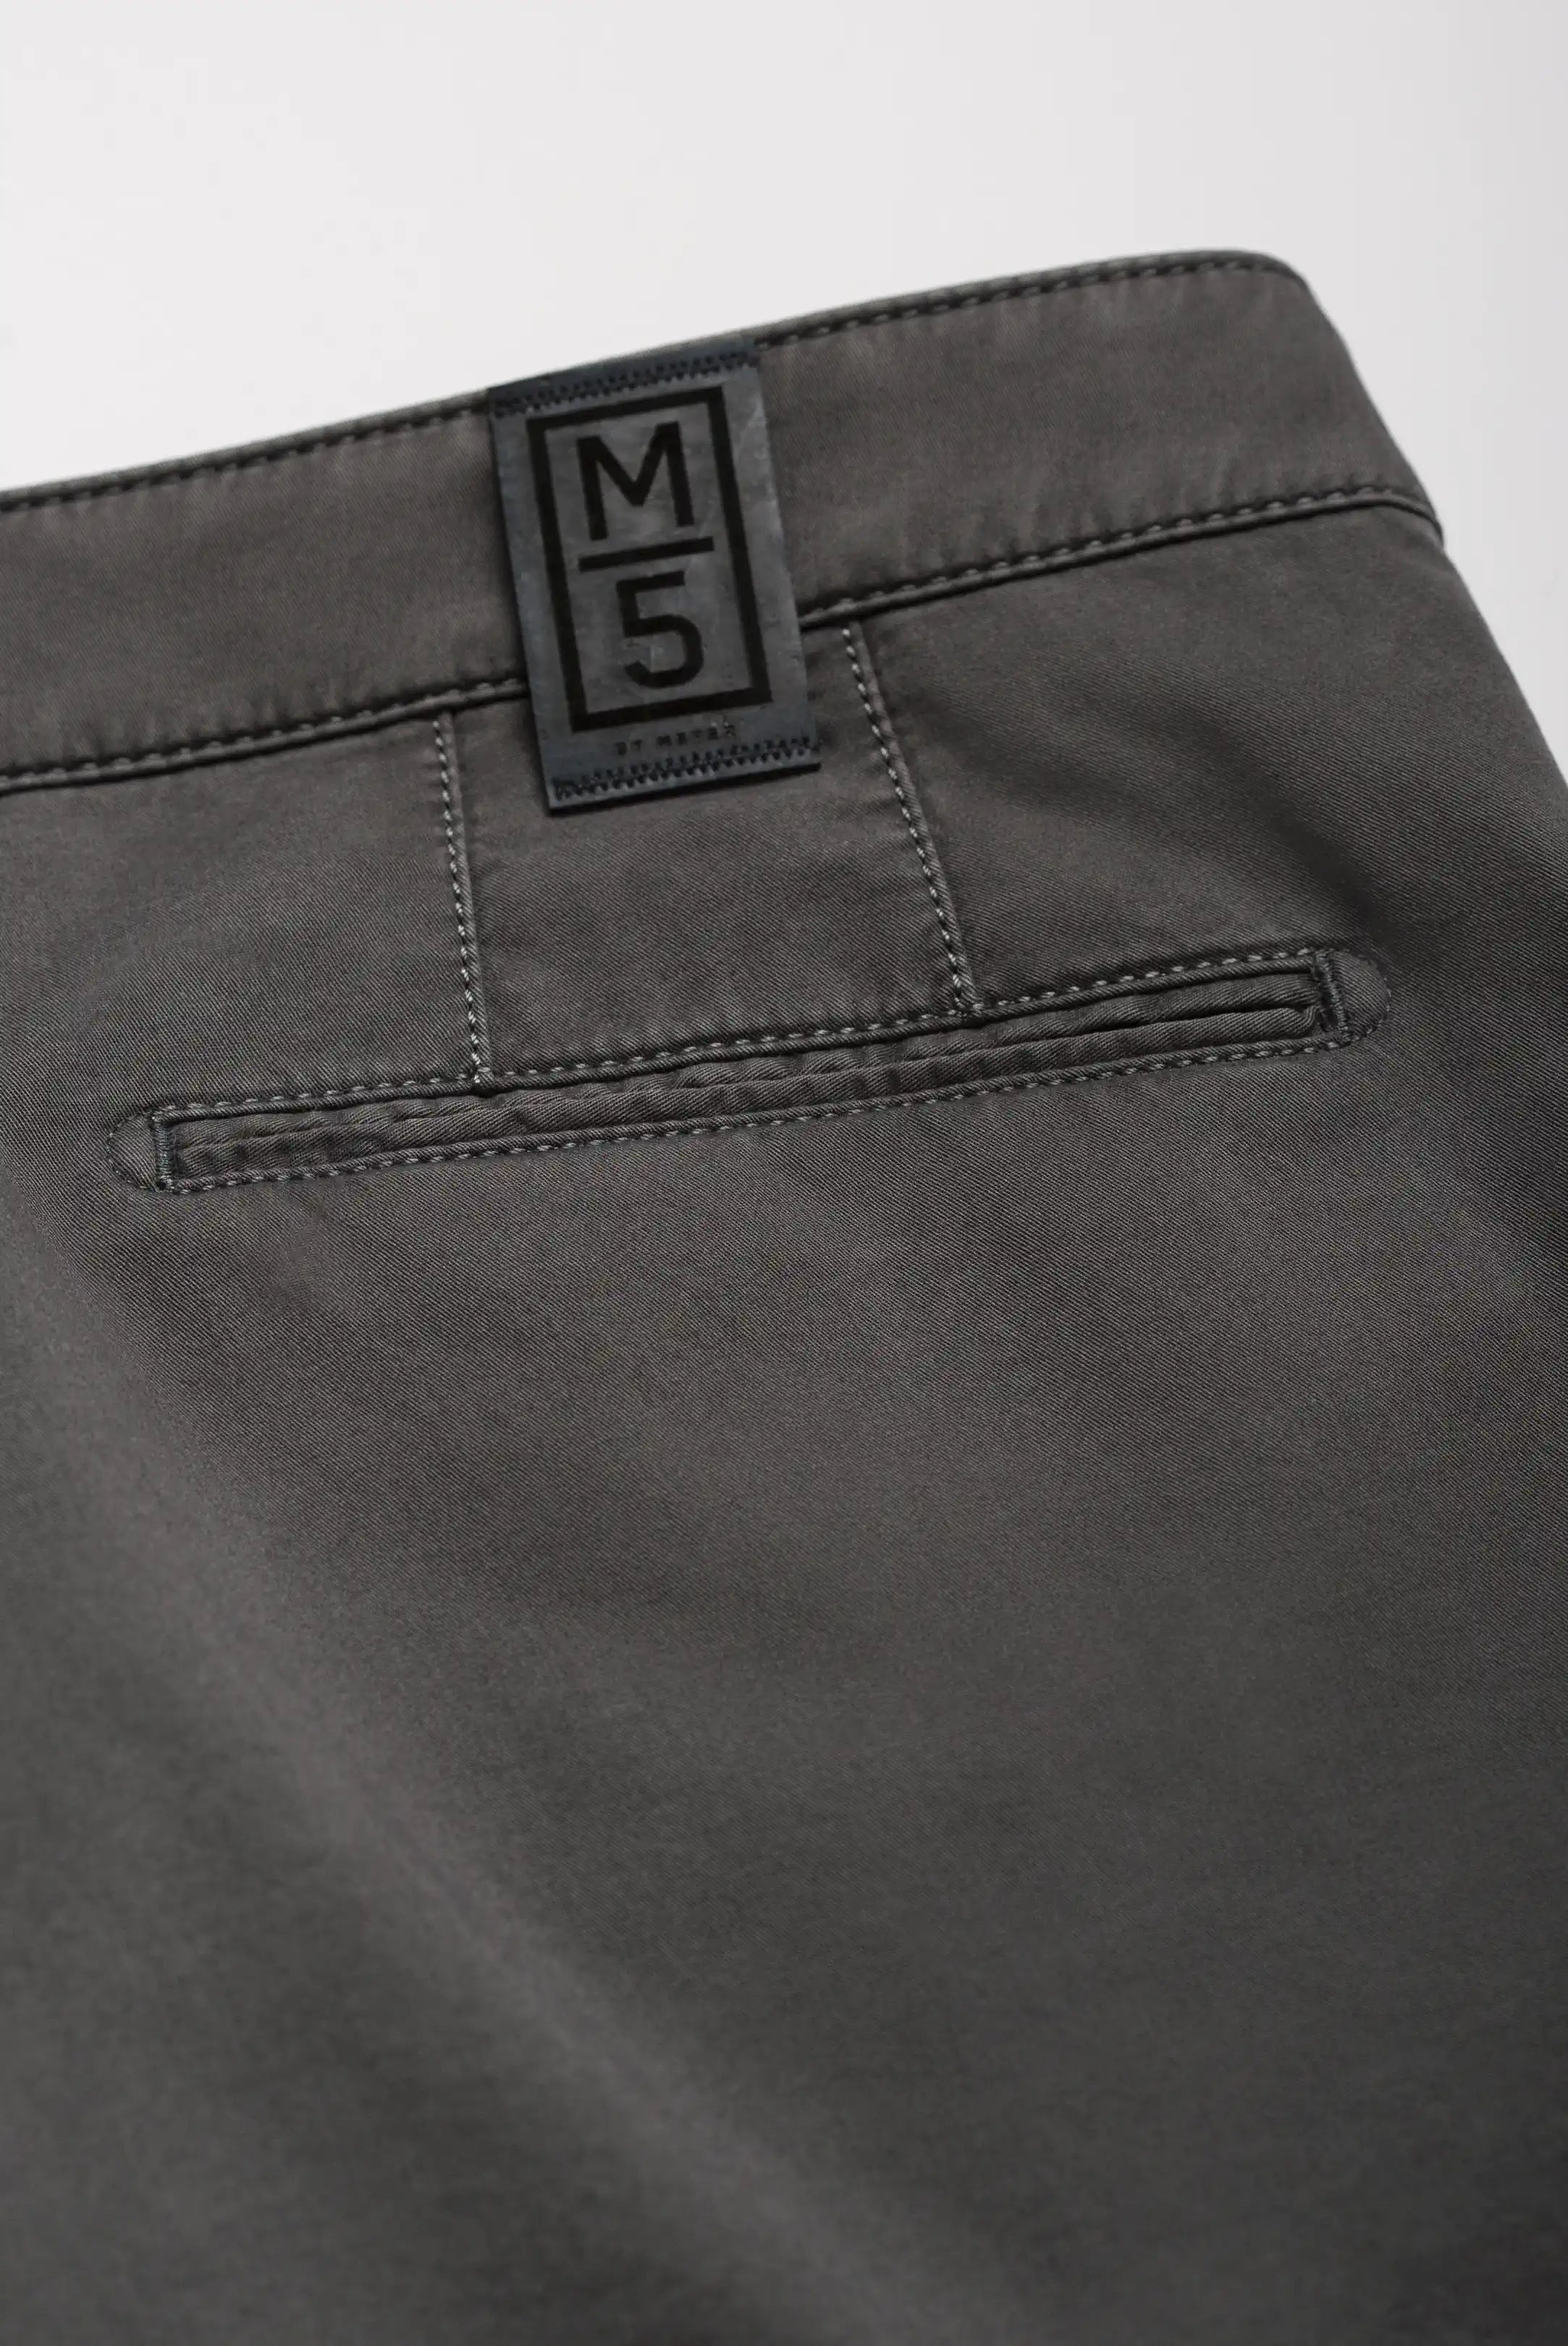 MEYER M5 Trousers - 6001 Soft Stretch Cotton Chinos - Charcoal